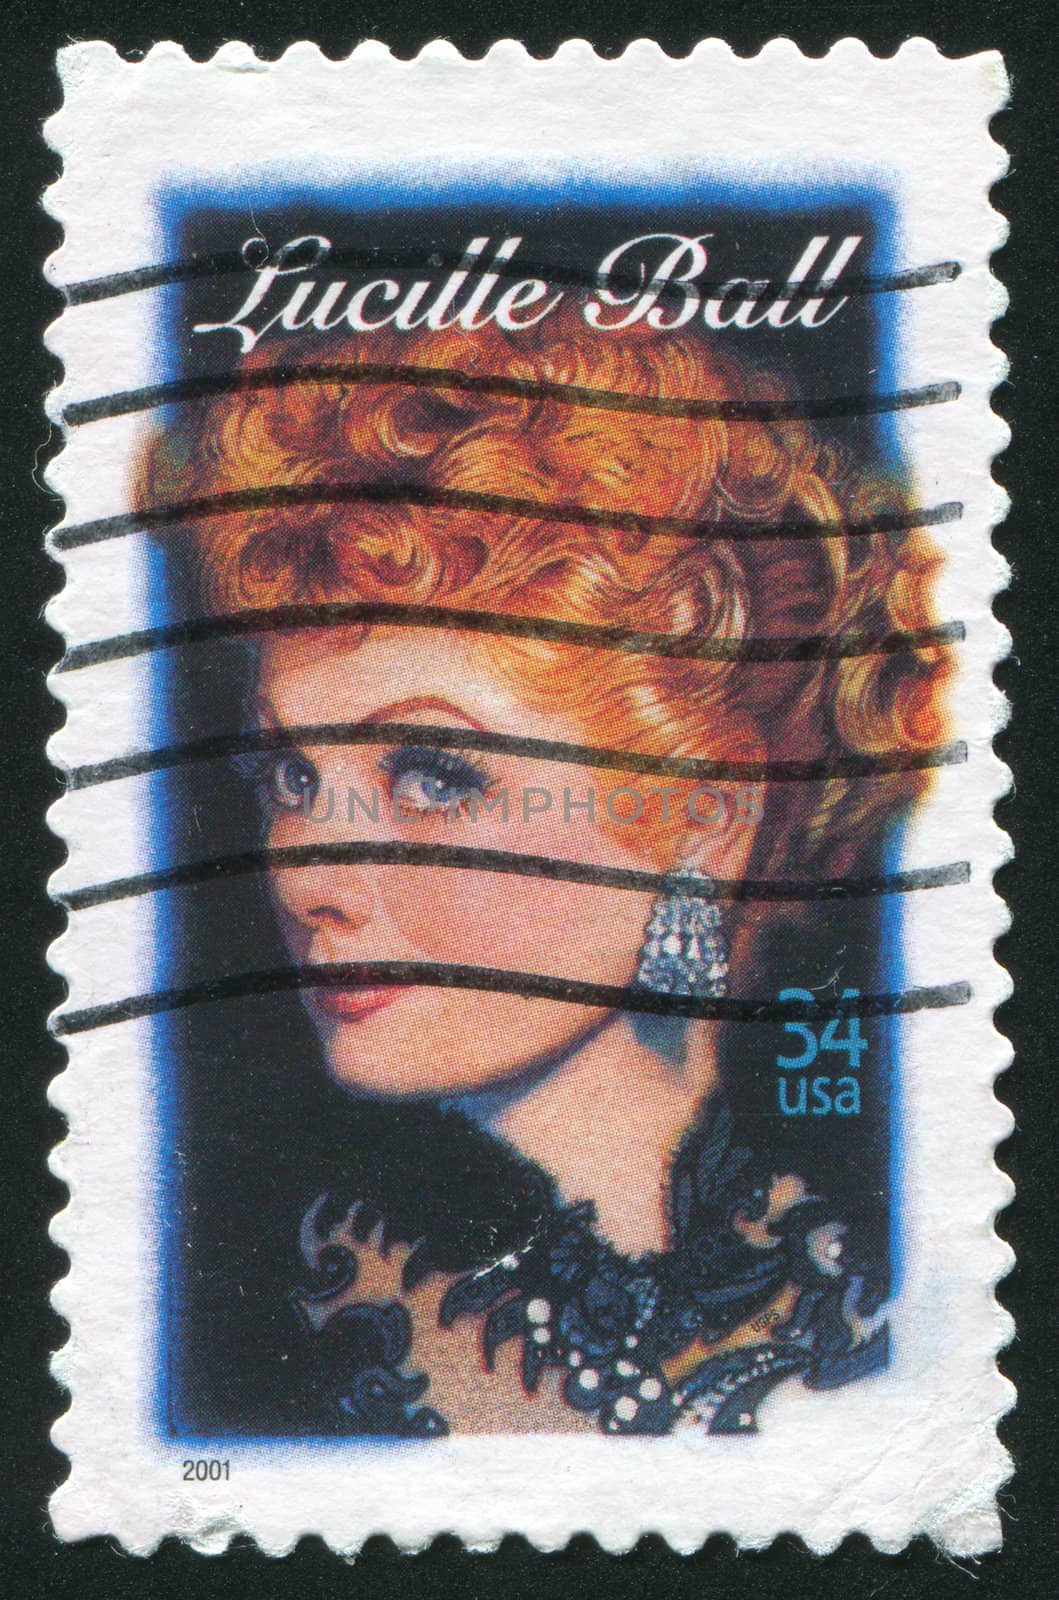 Lucille Ball by rook